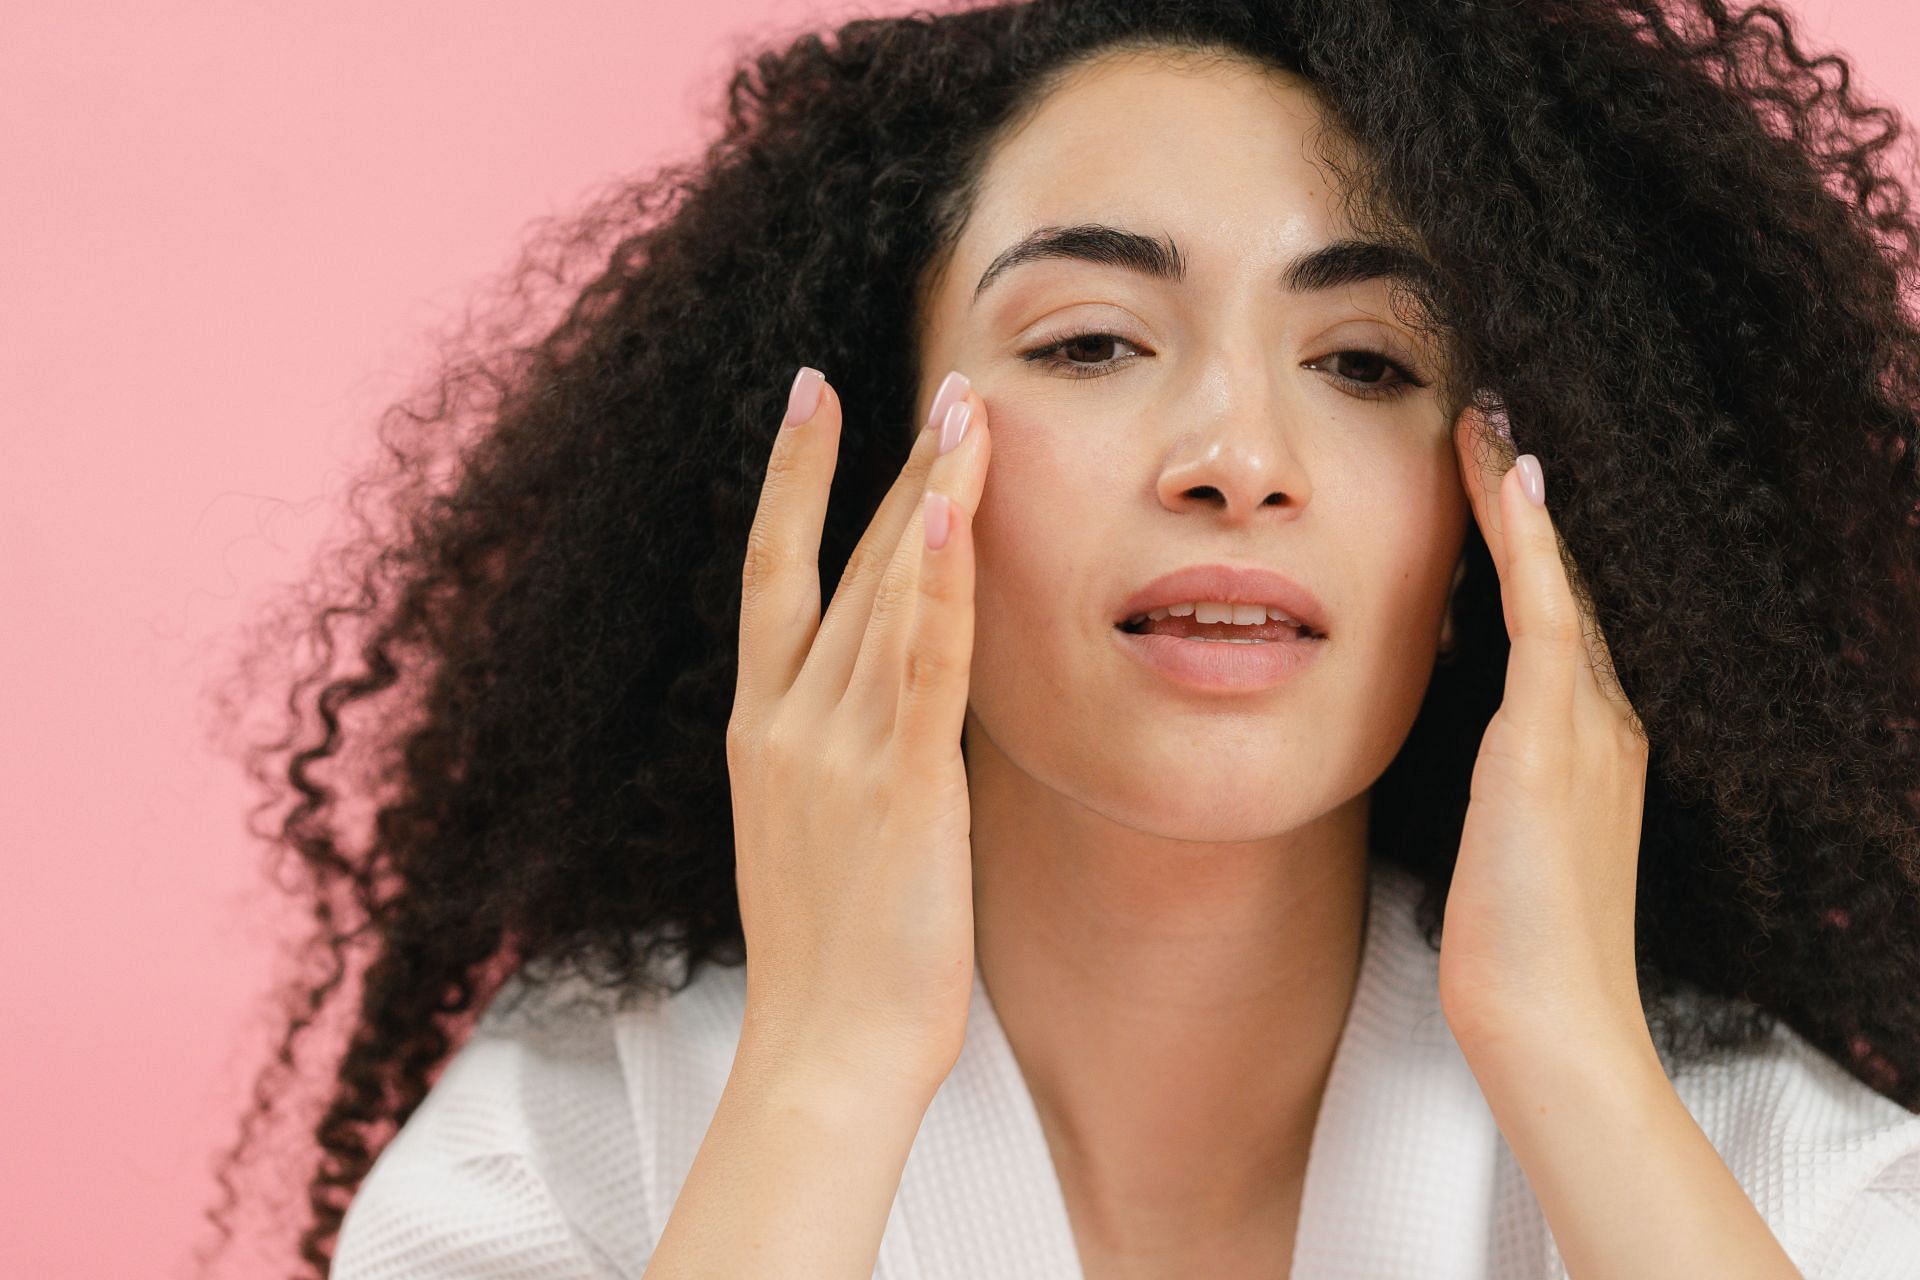 They are used to treat a variety of skin conditions, including eczema (itchy scalp, body), psoriasis, and dermatitis (Photo by SHVETS production/pexels)